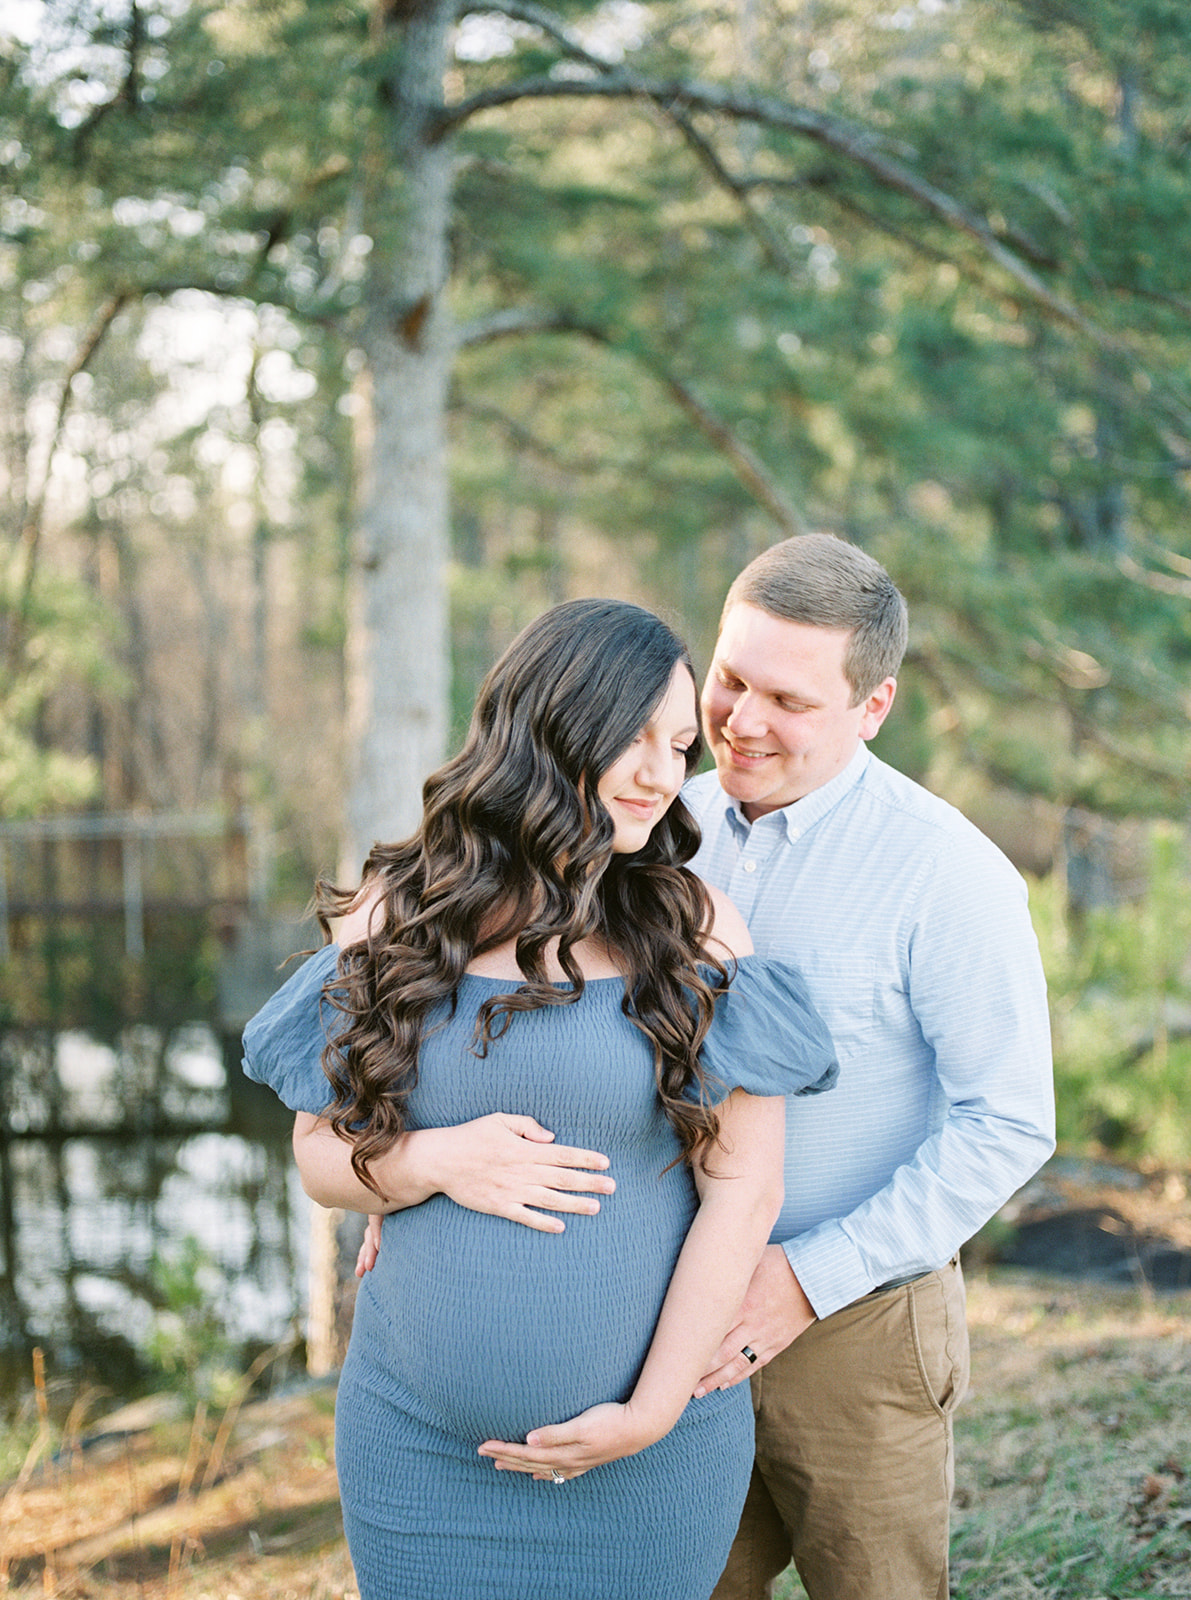 The couple poses at DeKalb County Lake for their spring maternity shoot in Sylvania, Alabama